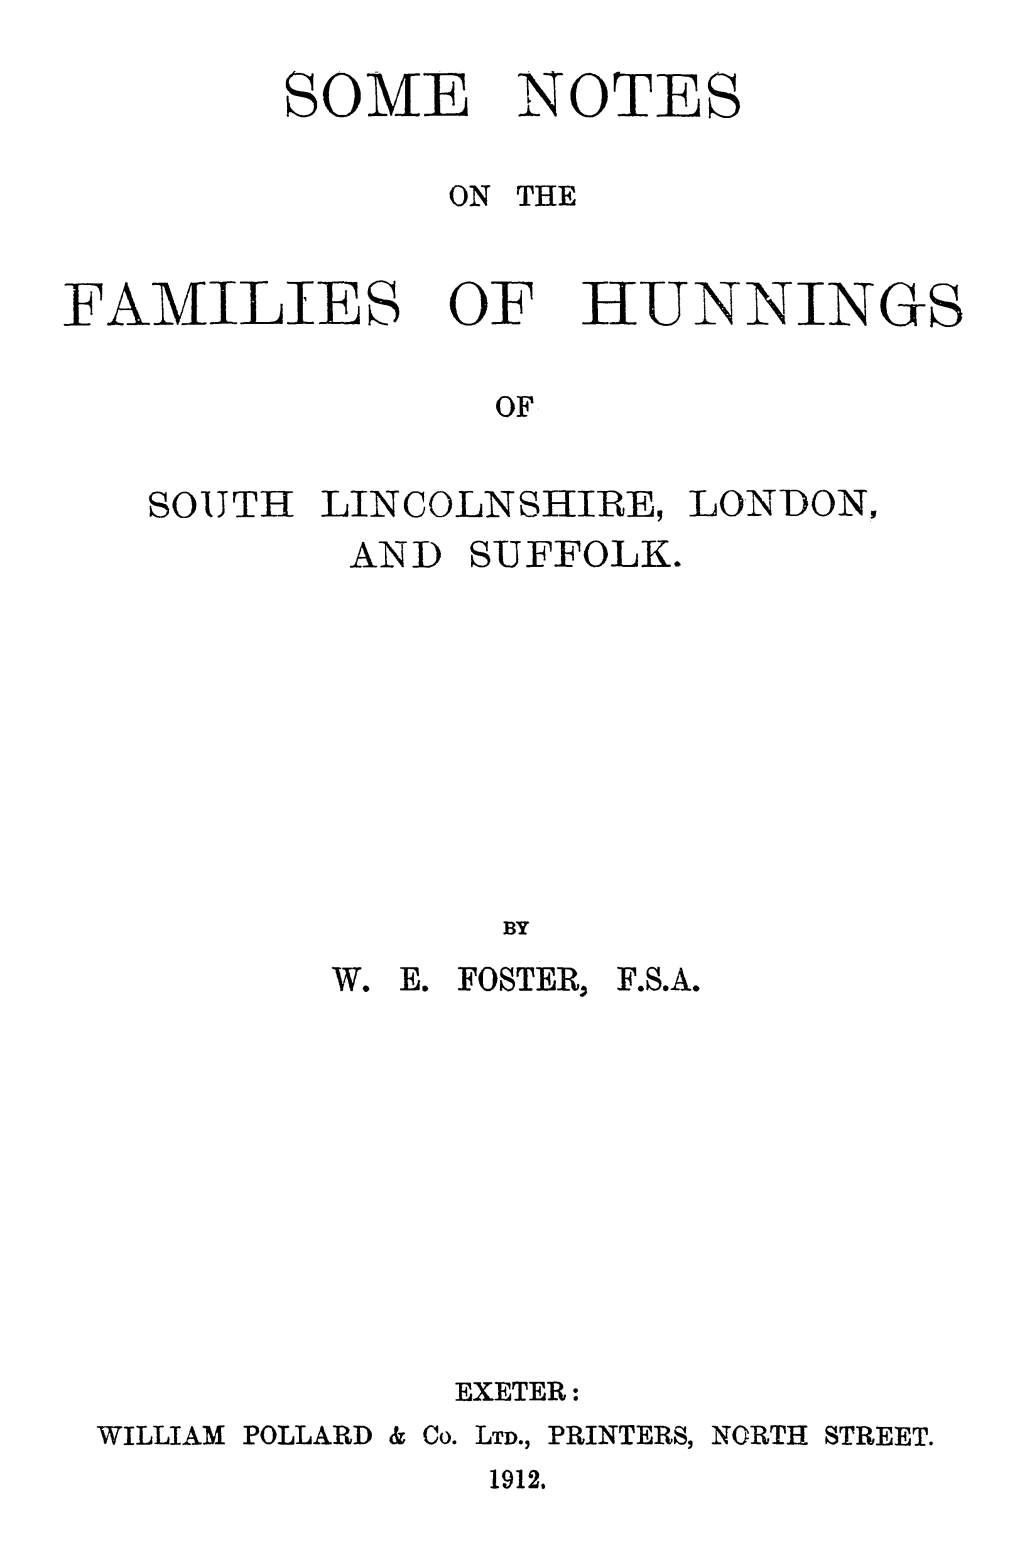 JOHN HUNNINGS of Holbeach and HIS ISSUE 37